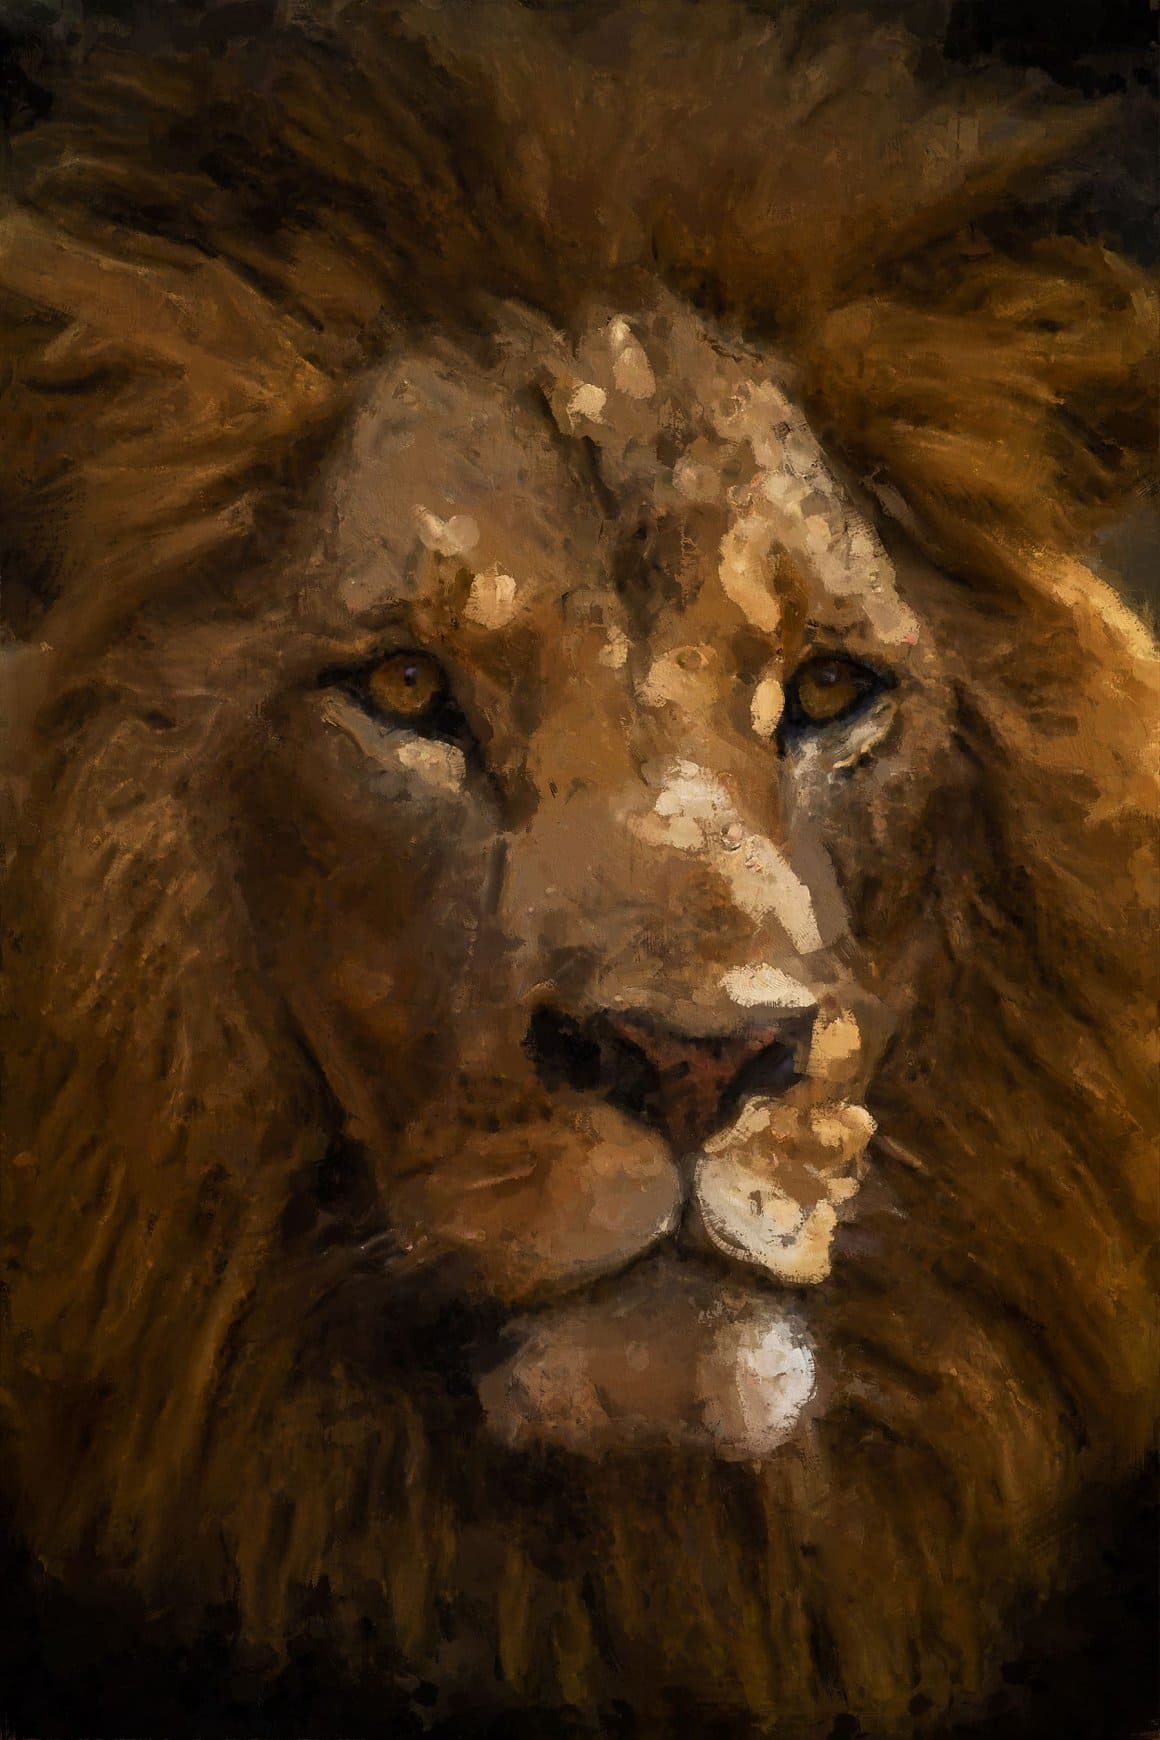 Lion head image using Painted Photoshop Effect.